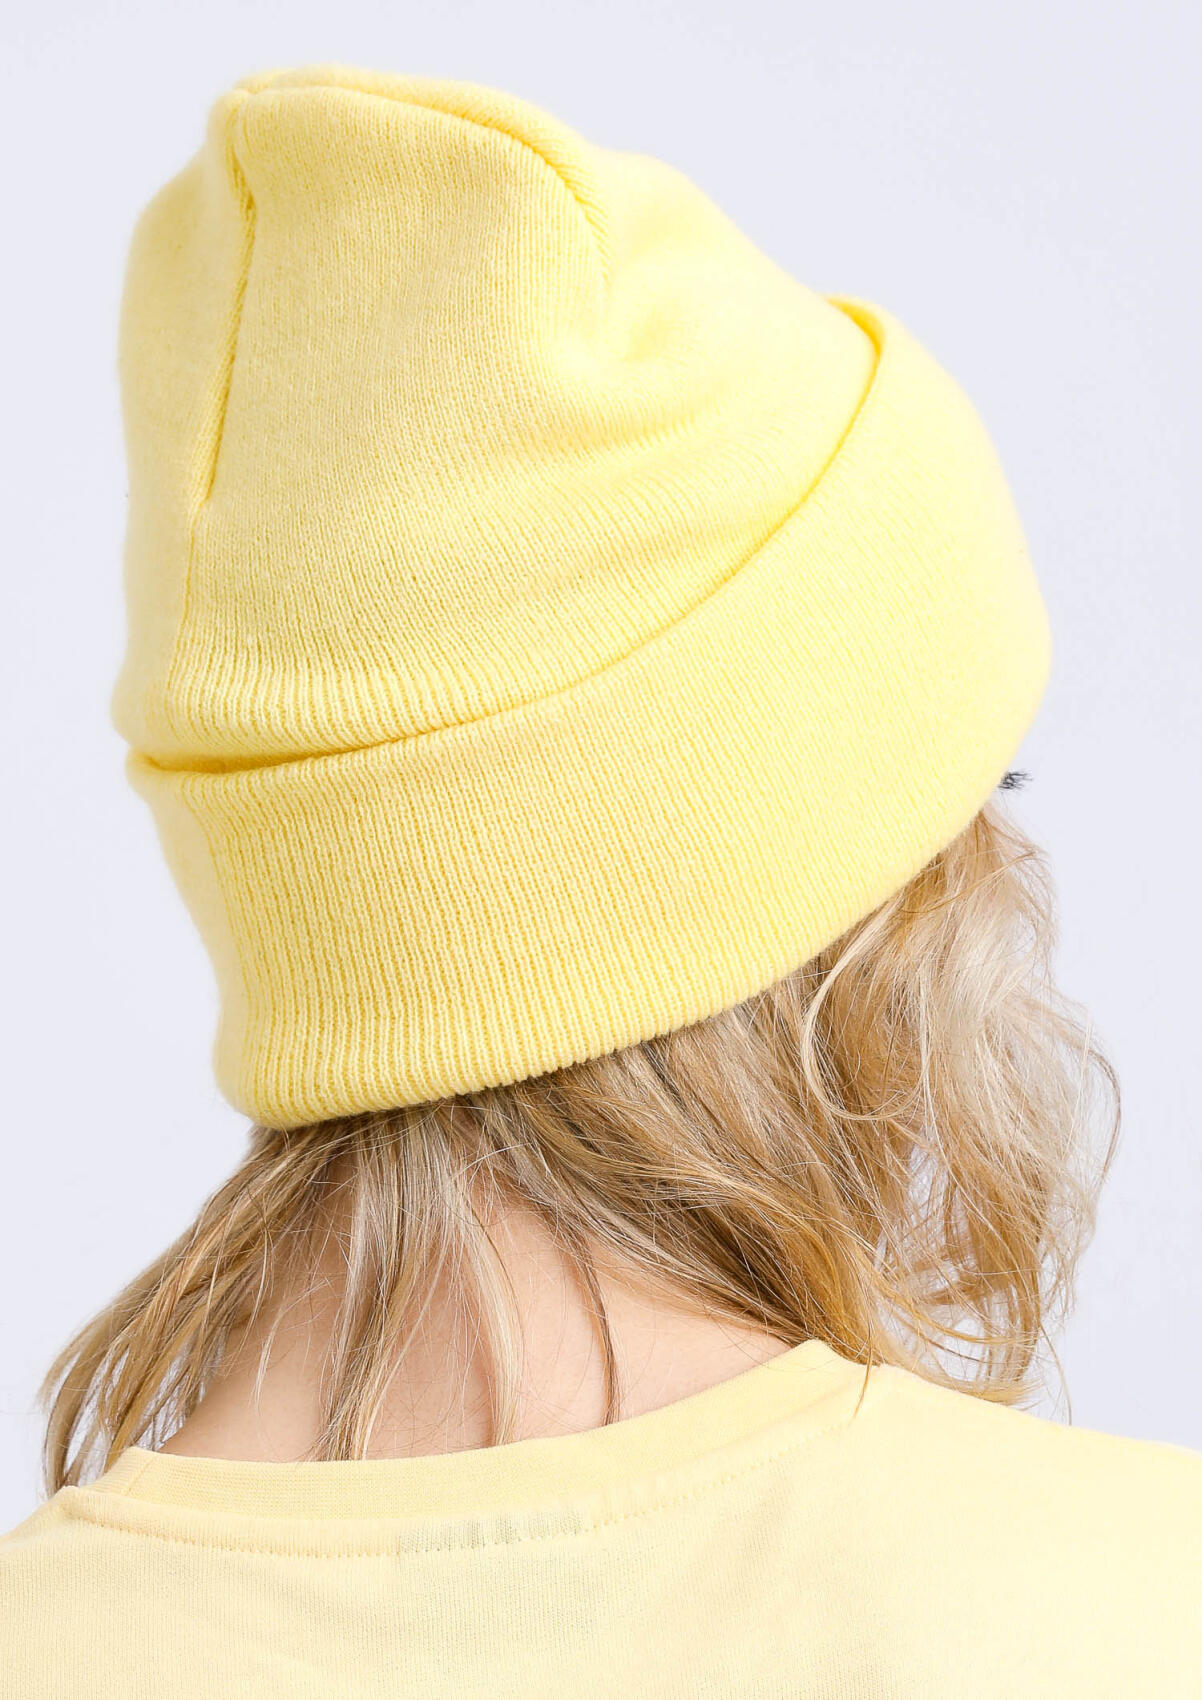 Beanie "All Colours" - Light Yellow